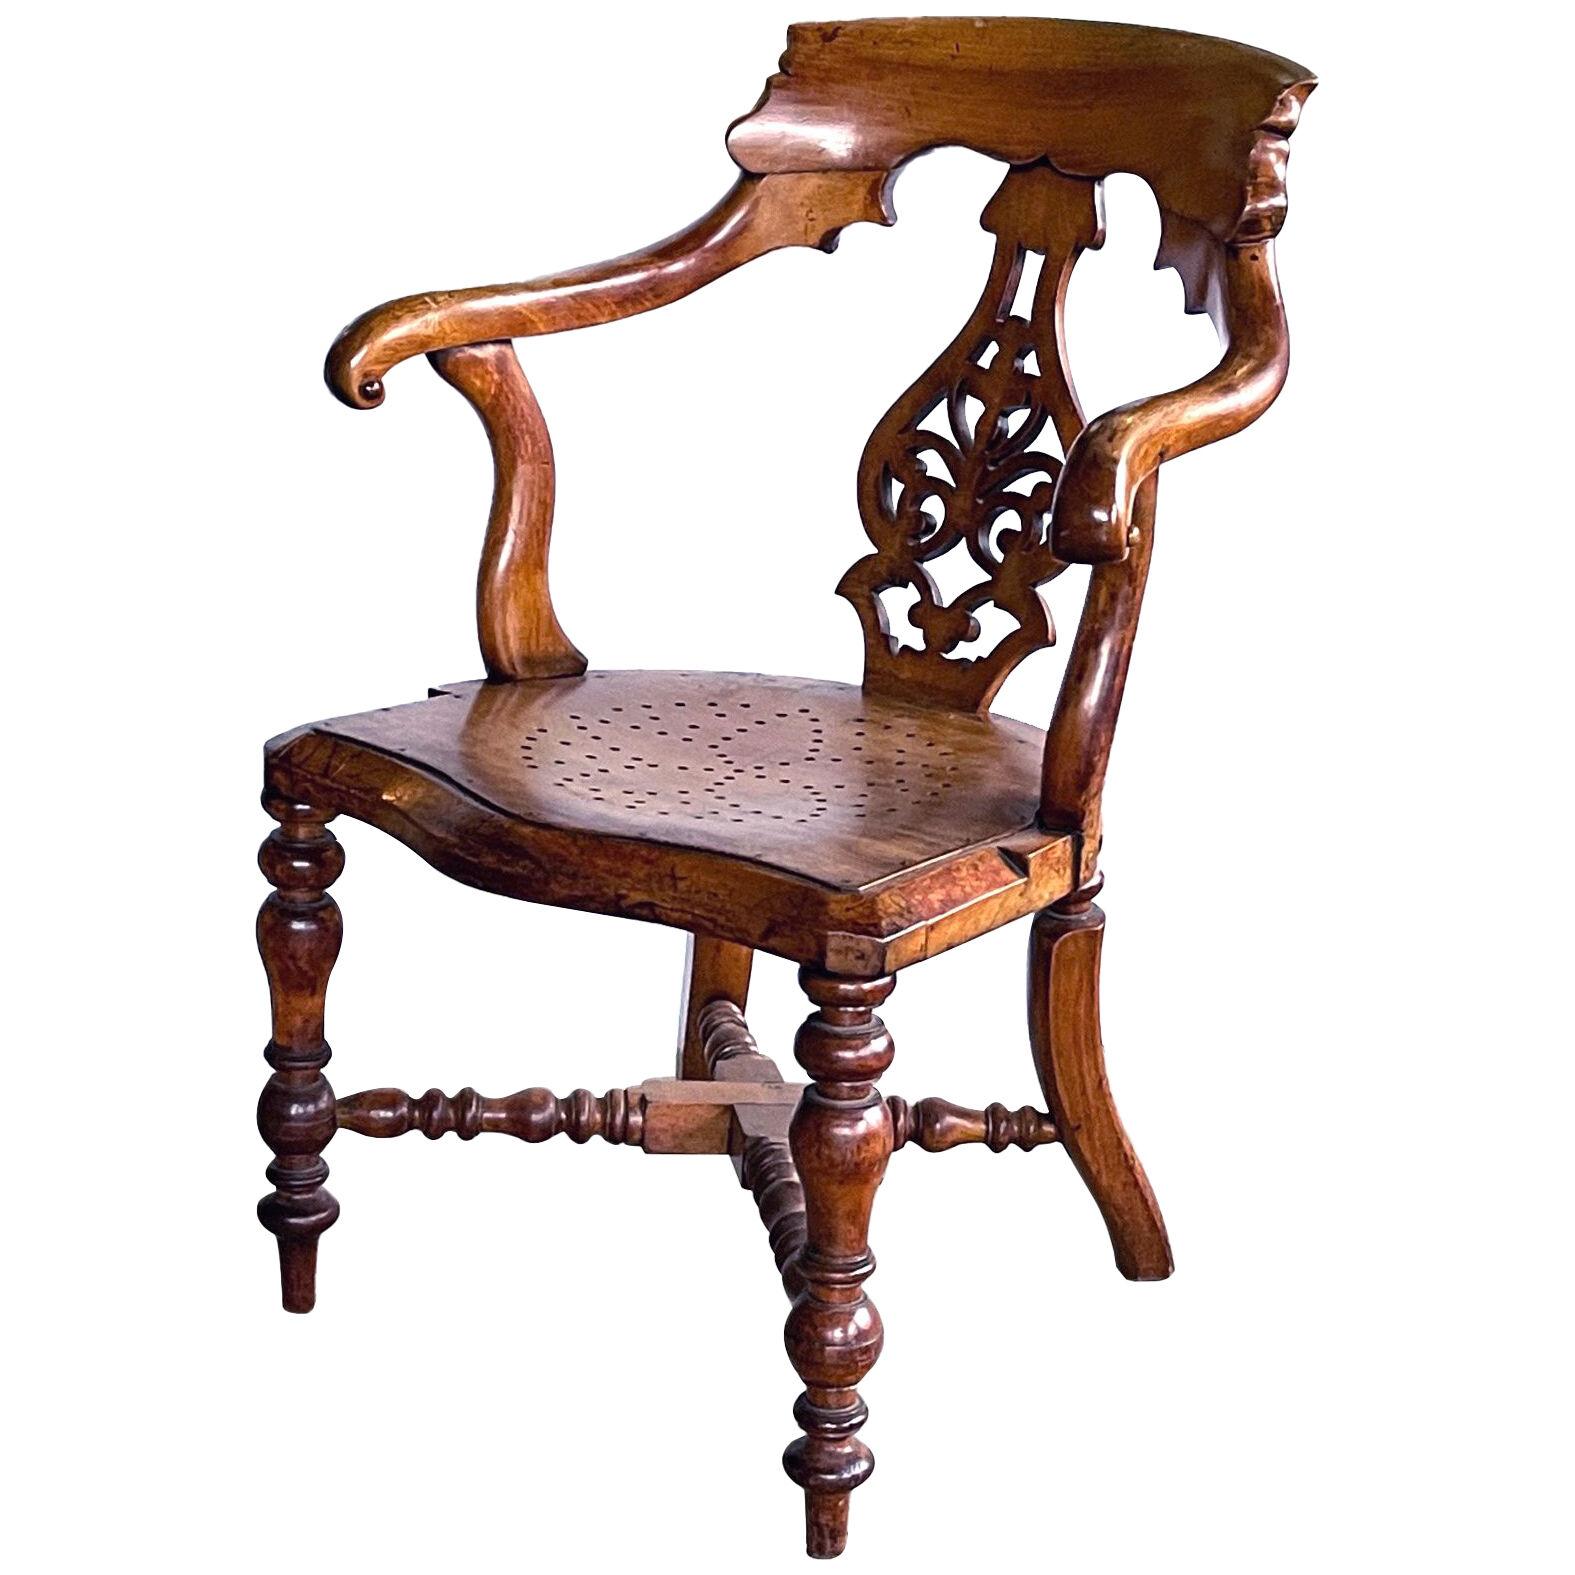 A Handsome English Yew Wood Captain's Chair